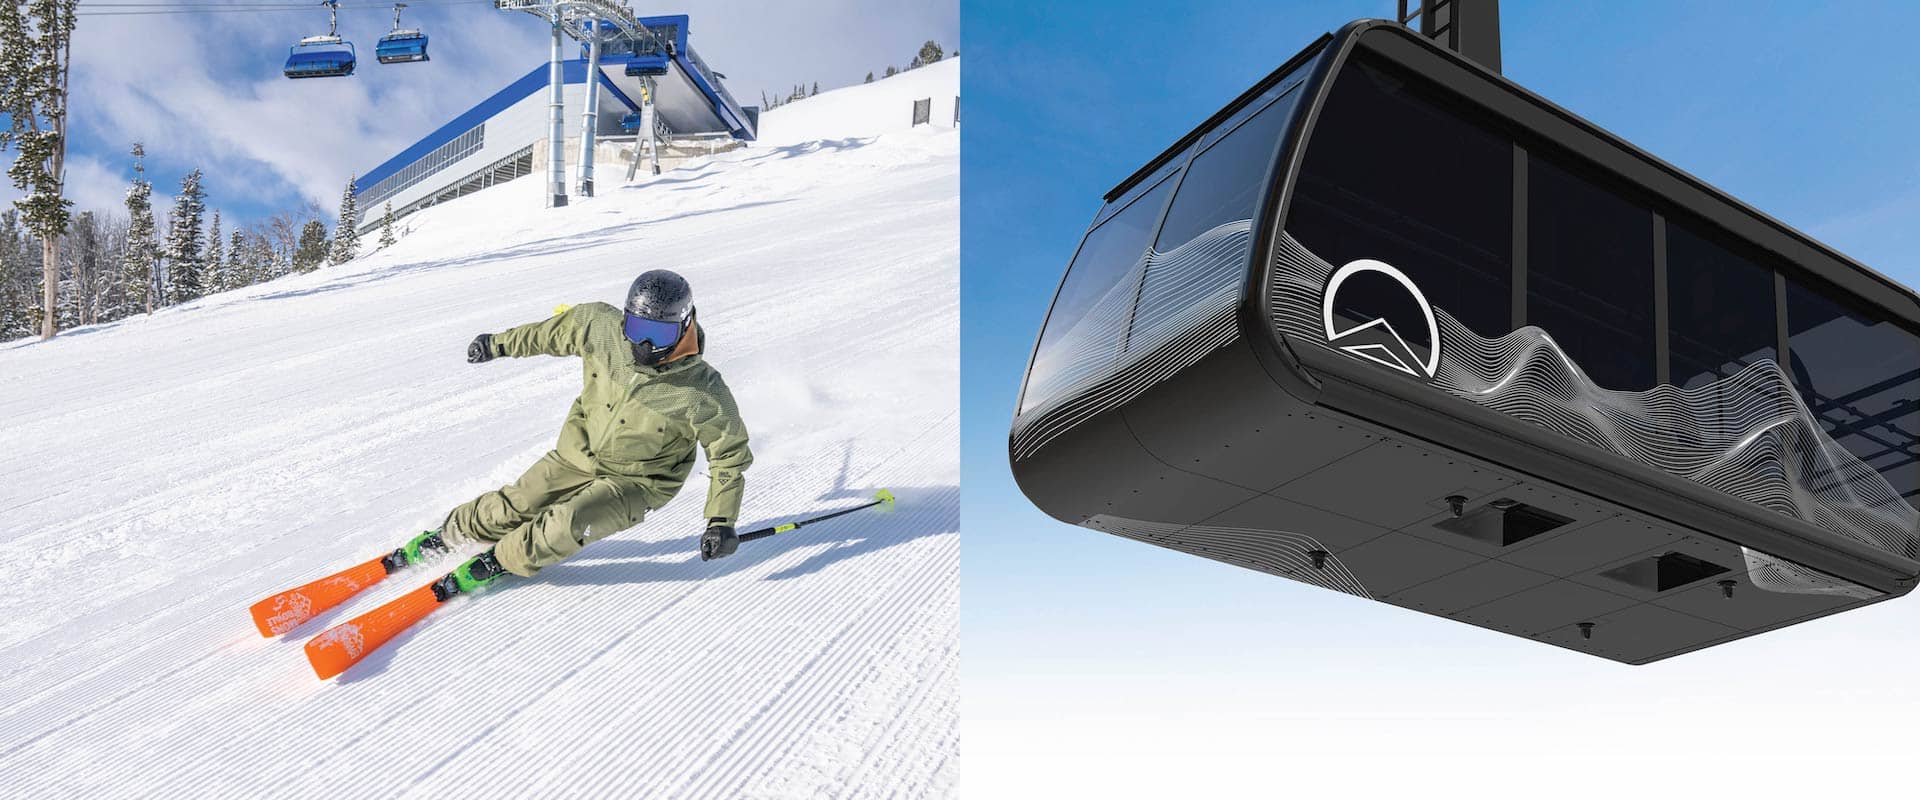 Side-by-side image of a skier and the new Lone Peak Tram cabin